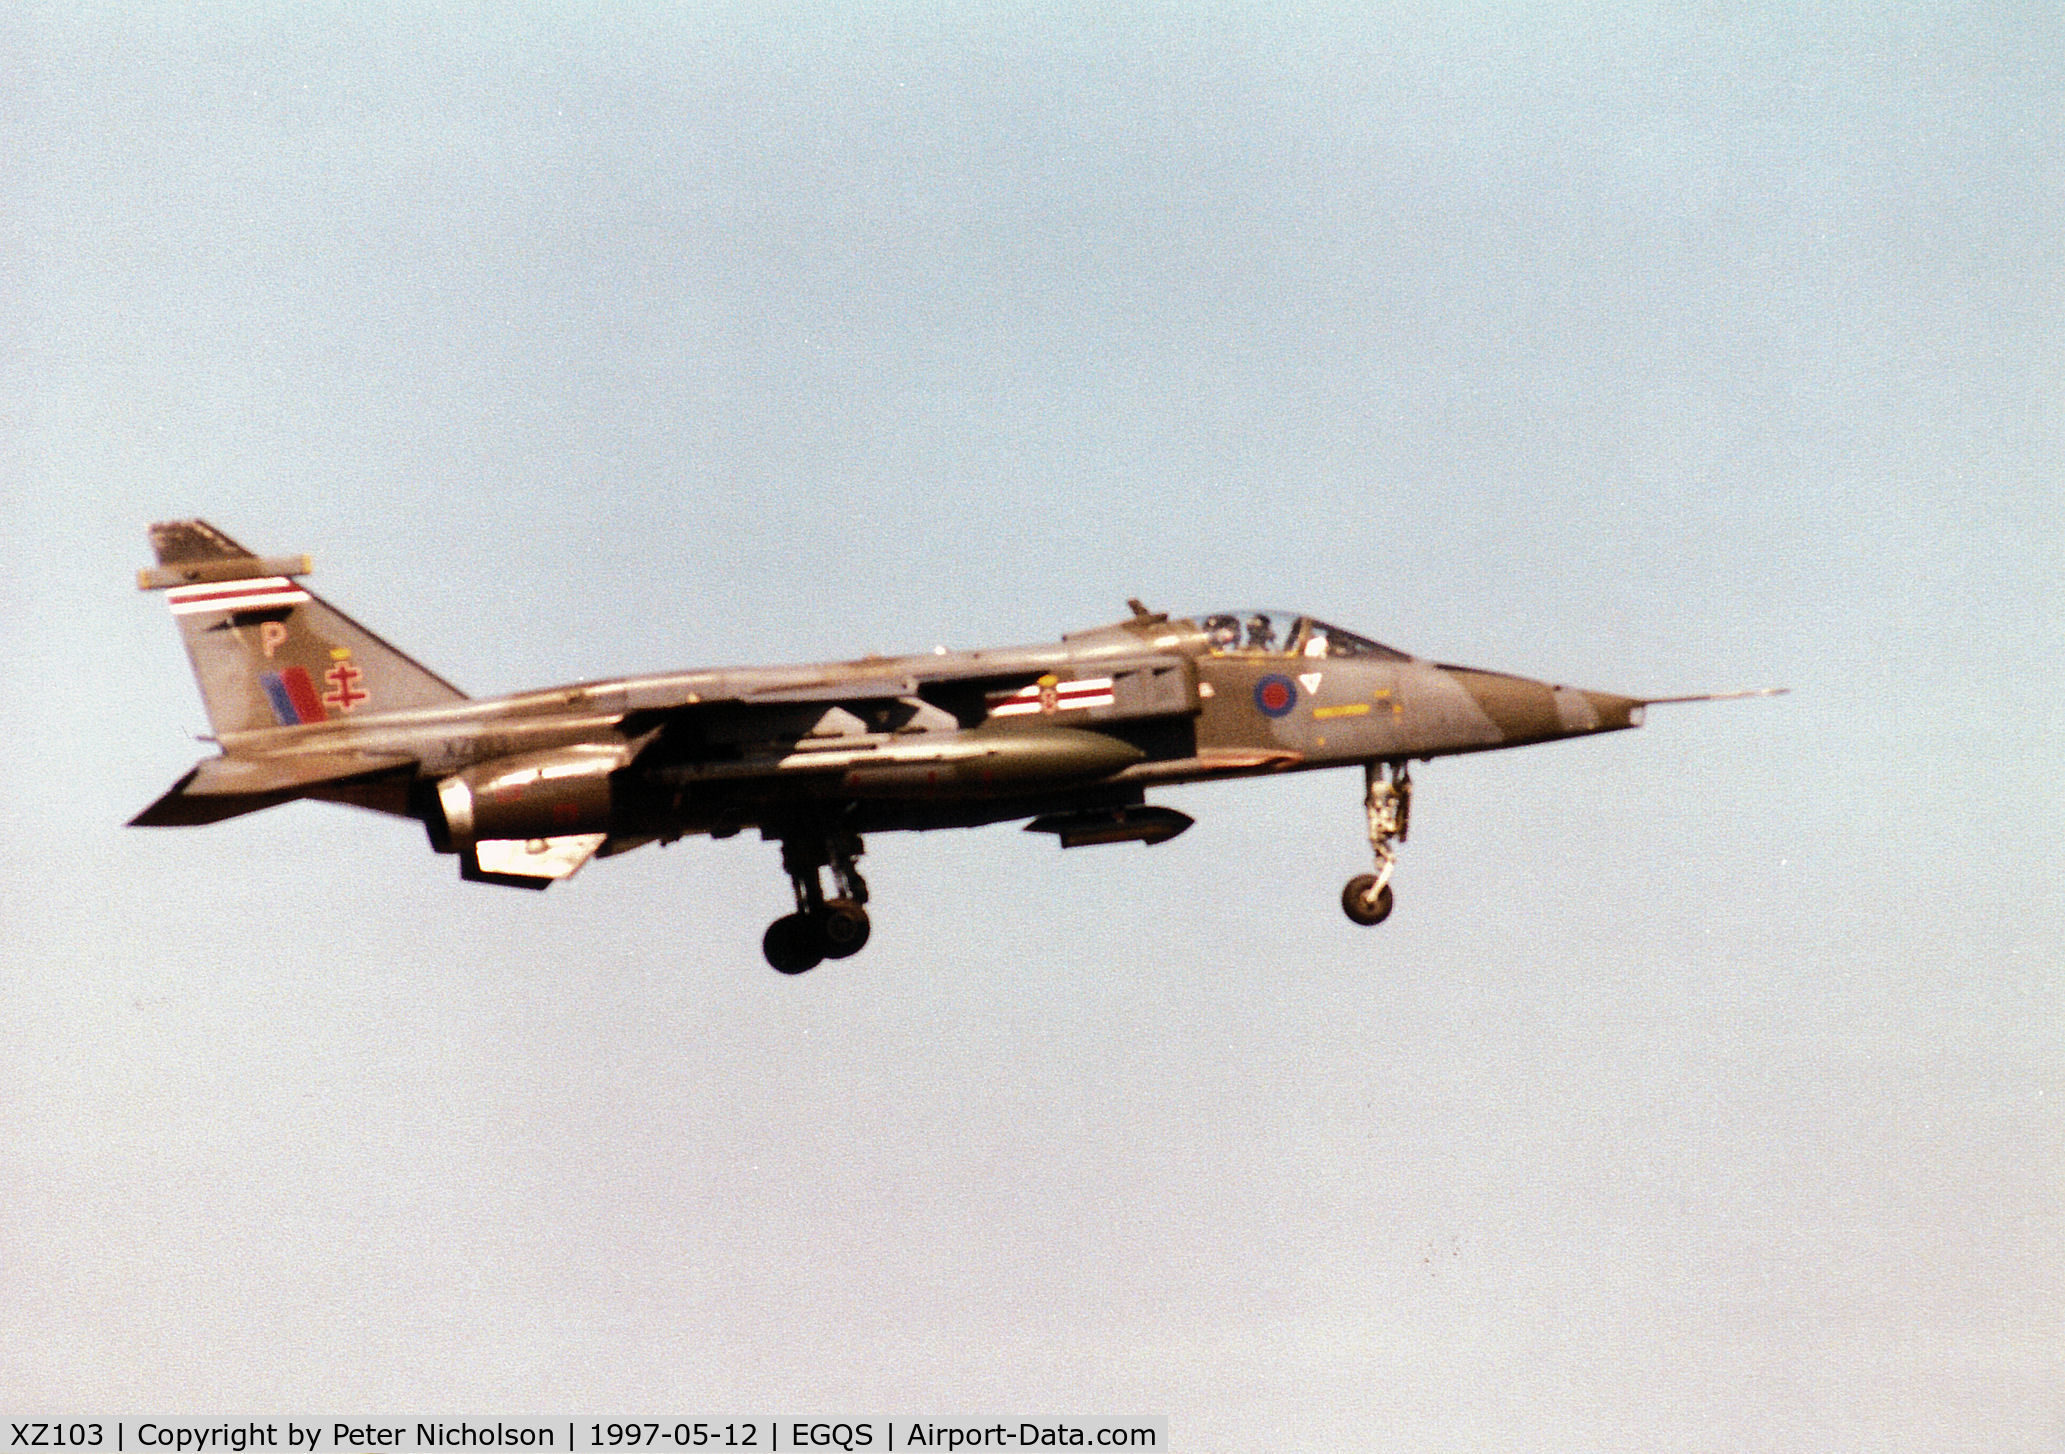 XZ103, 1976 Sepecat Jaguar GR.1A C/N S.104, Jaguar GR.1A, callsign Boxer 3, of 41 Squadron at RAF Coltishall on final approch to Runway 05 at RAF Lossiemouth in the Summer of 1997.